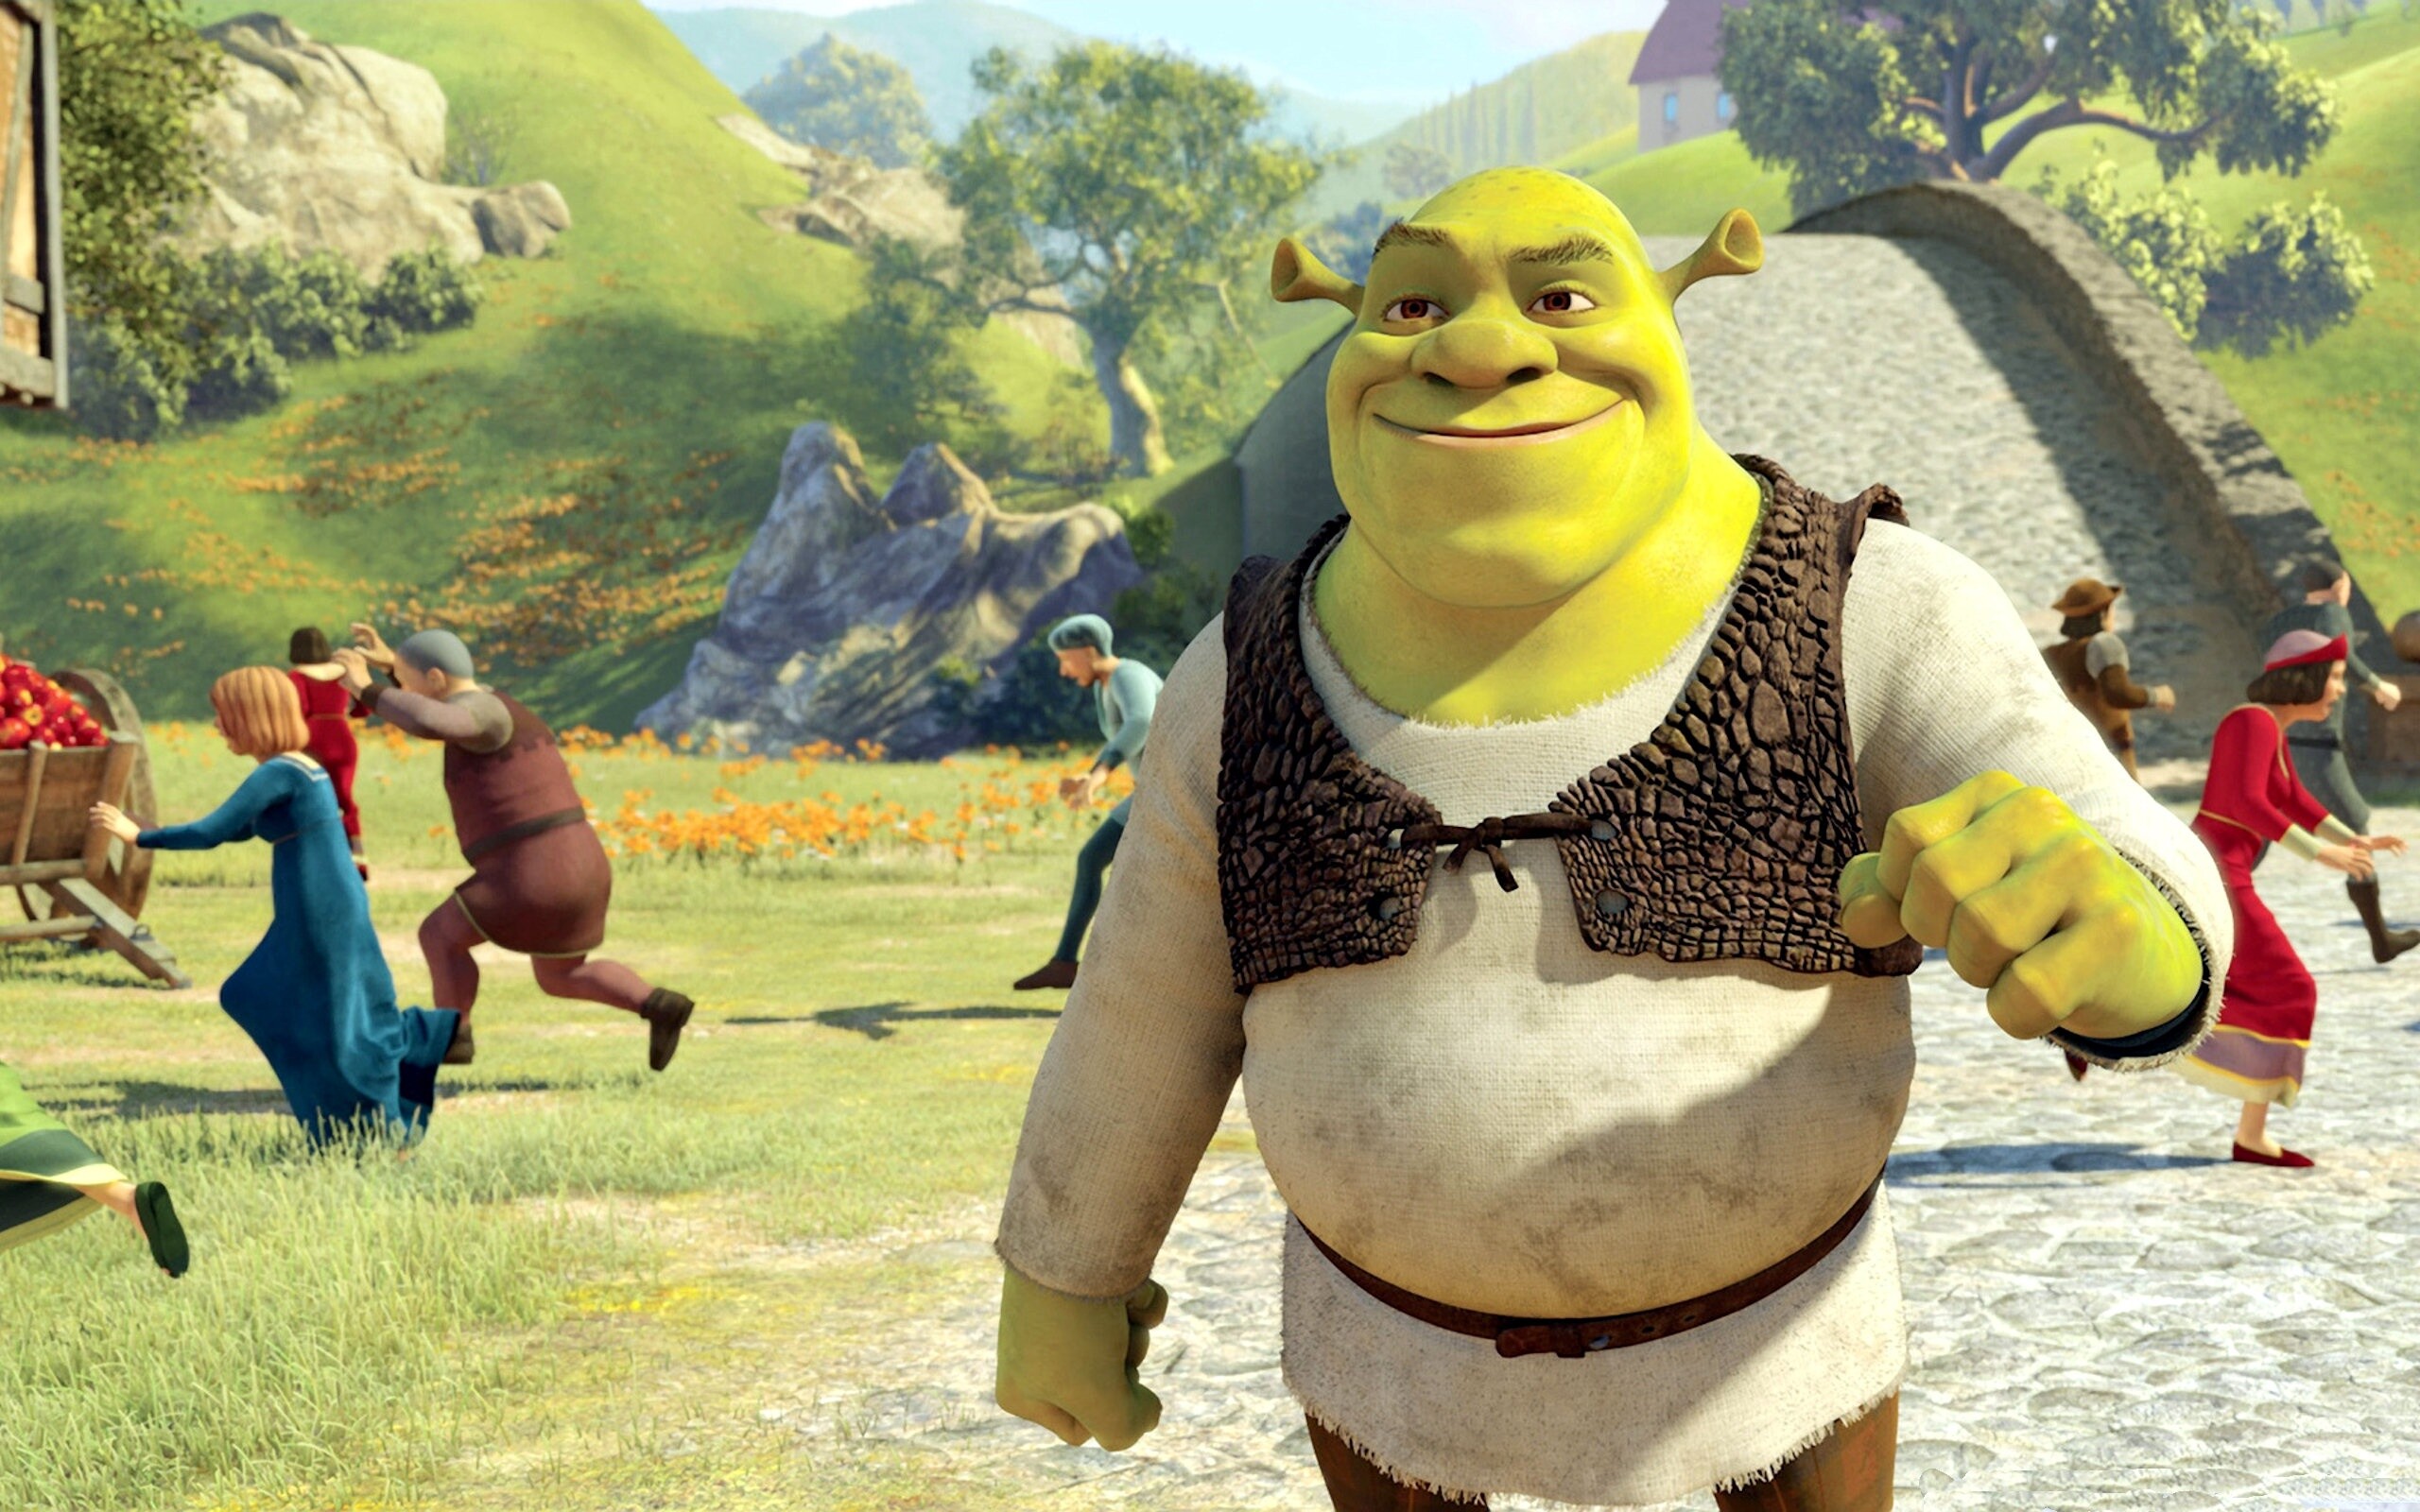 Shrek: The series primarily focuses on a bad-tempered but good-hearted ogre, who begrudgingly accepts a quest to rescue a princess, resulting in him finding friends and going on many subsequent adventures in a fairy-tale world. 2560x1600 HD Wallpaper.